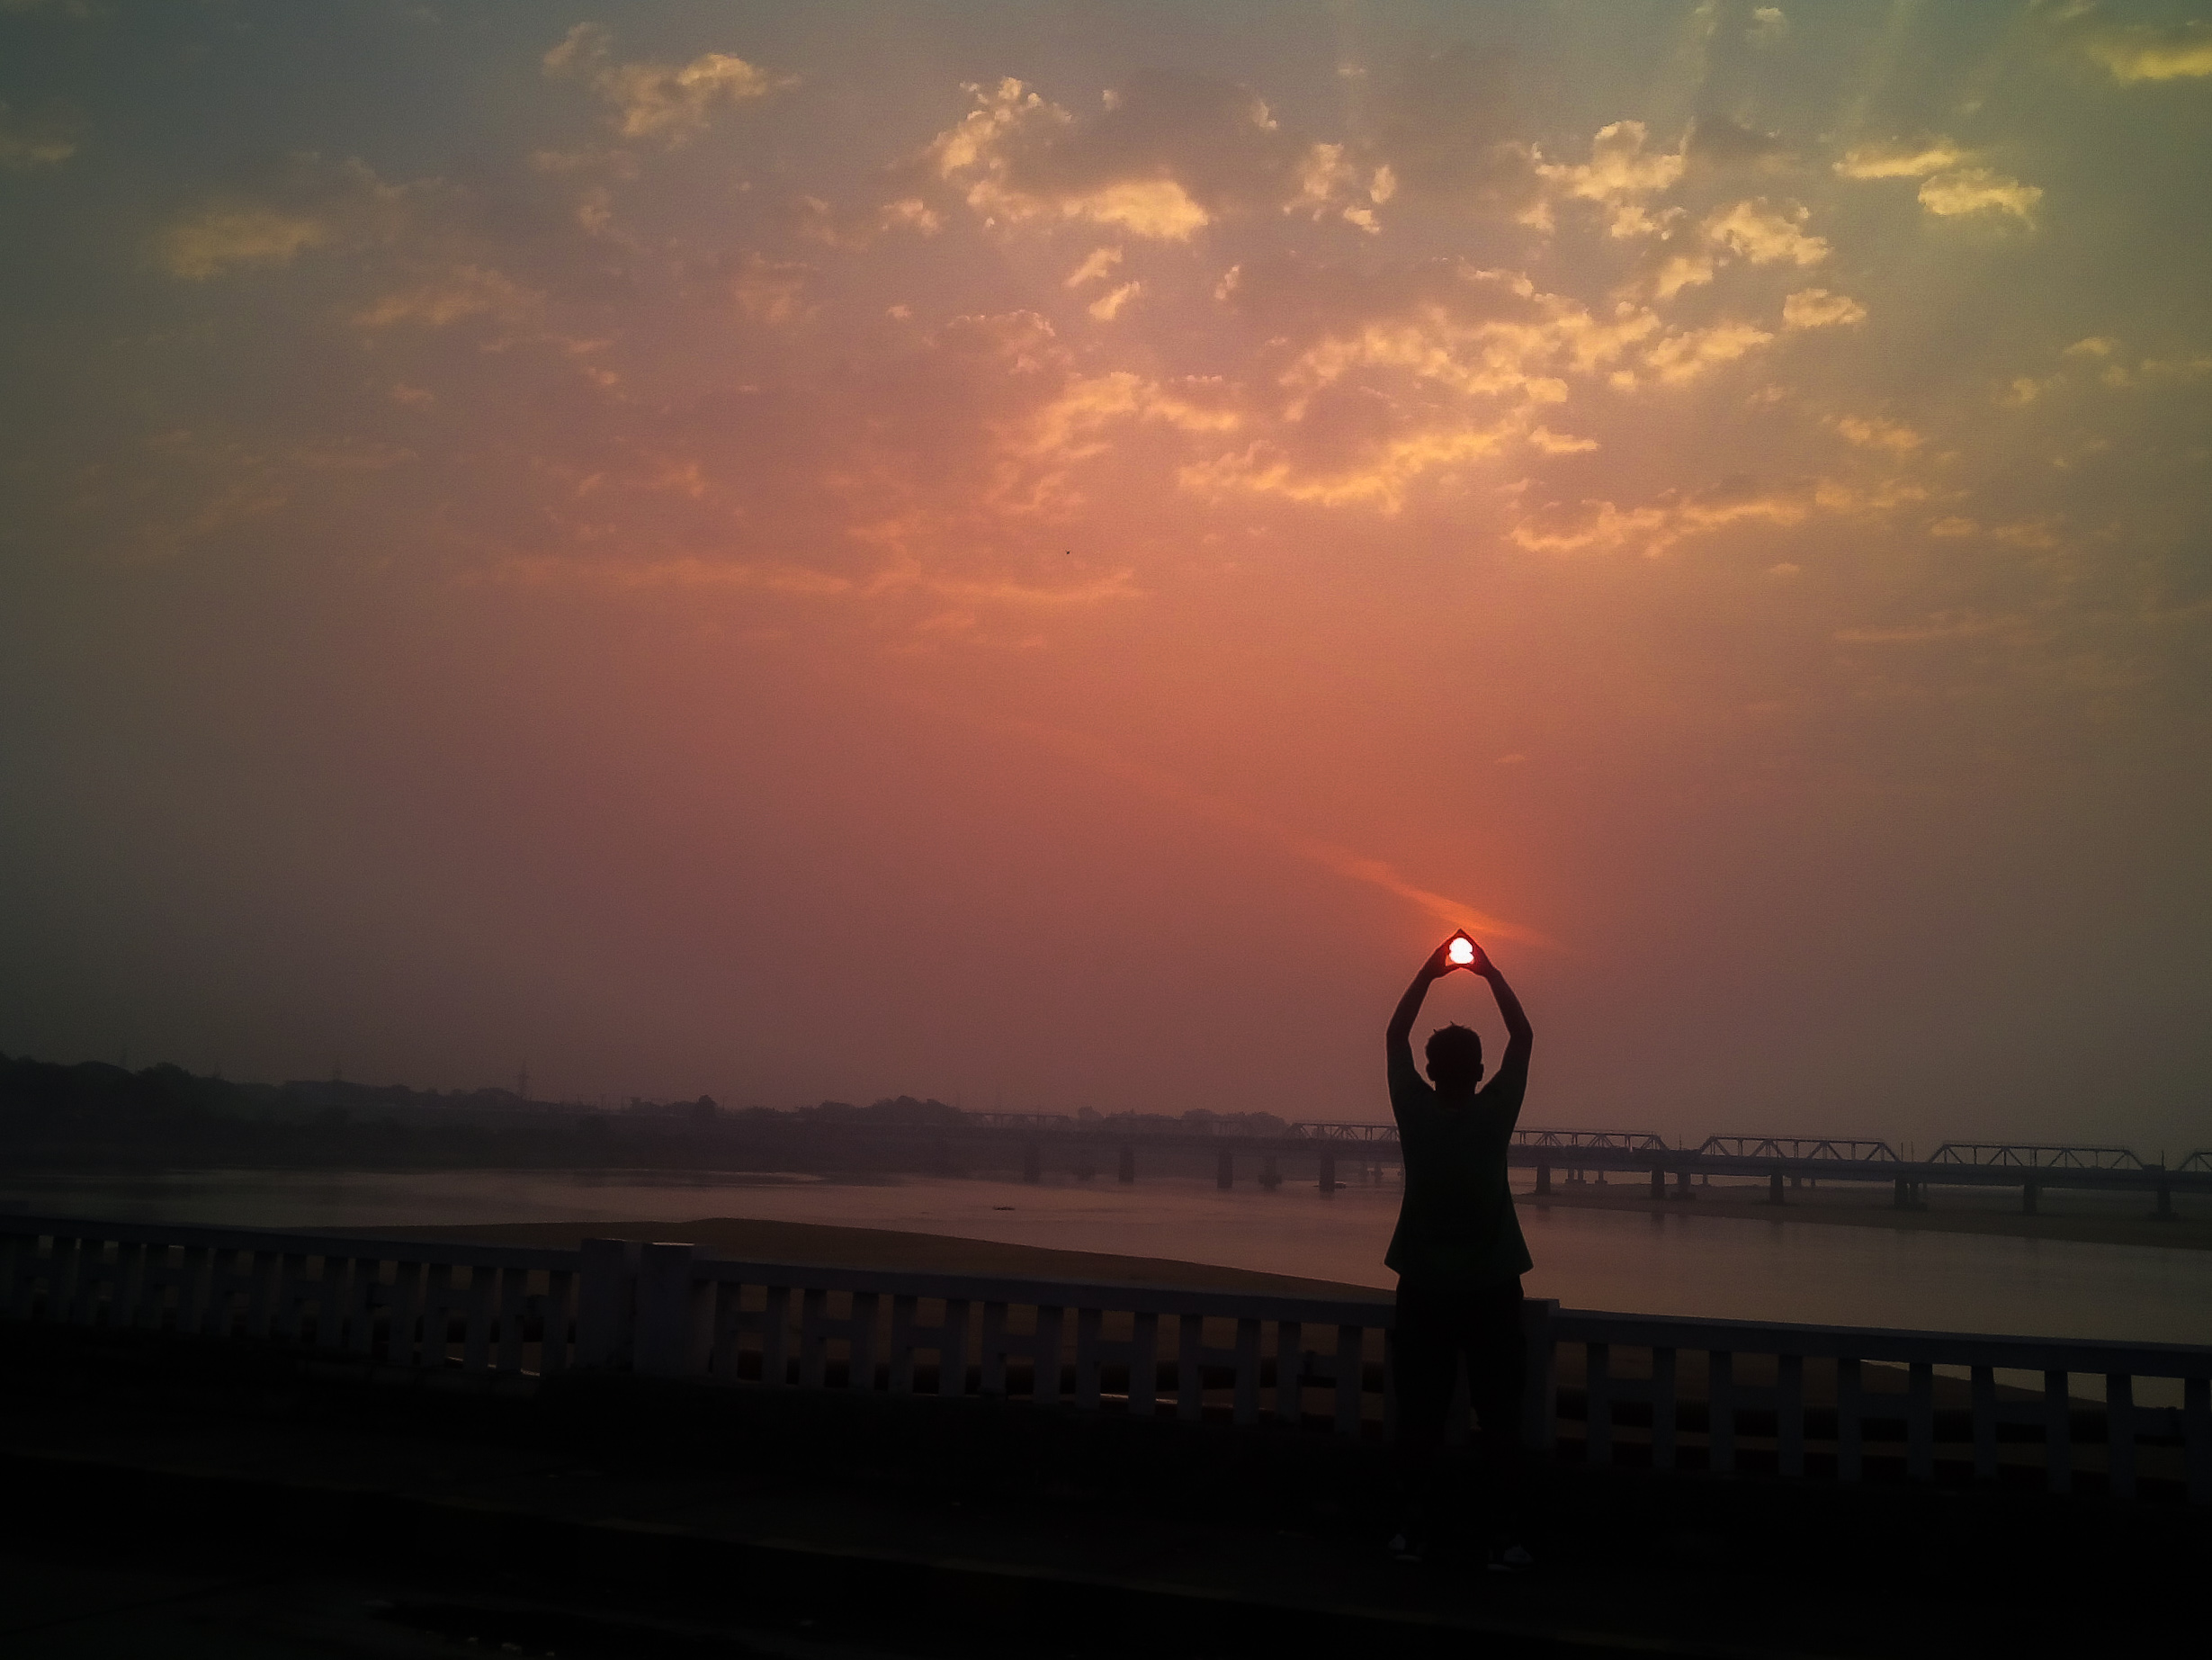 Sunrise Picture by Biswa890